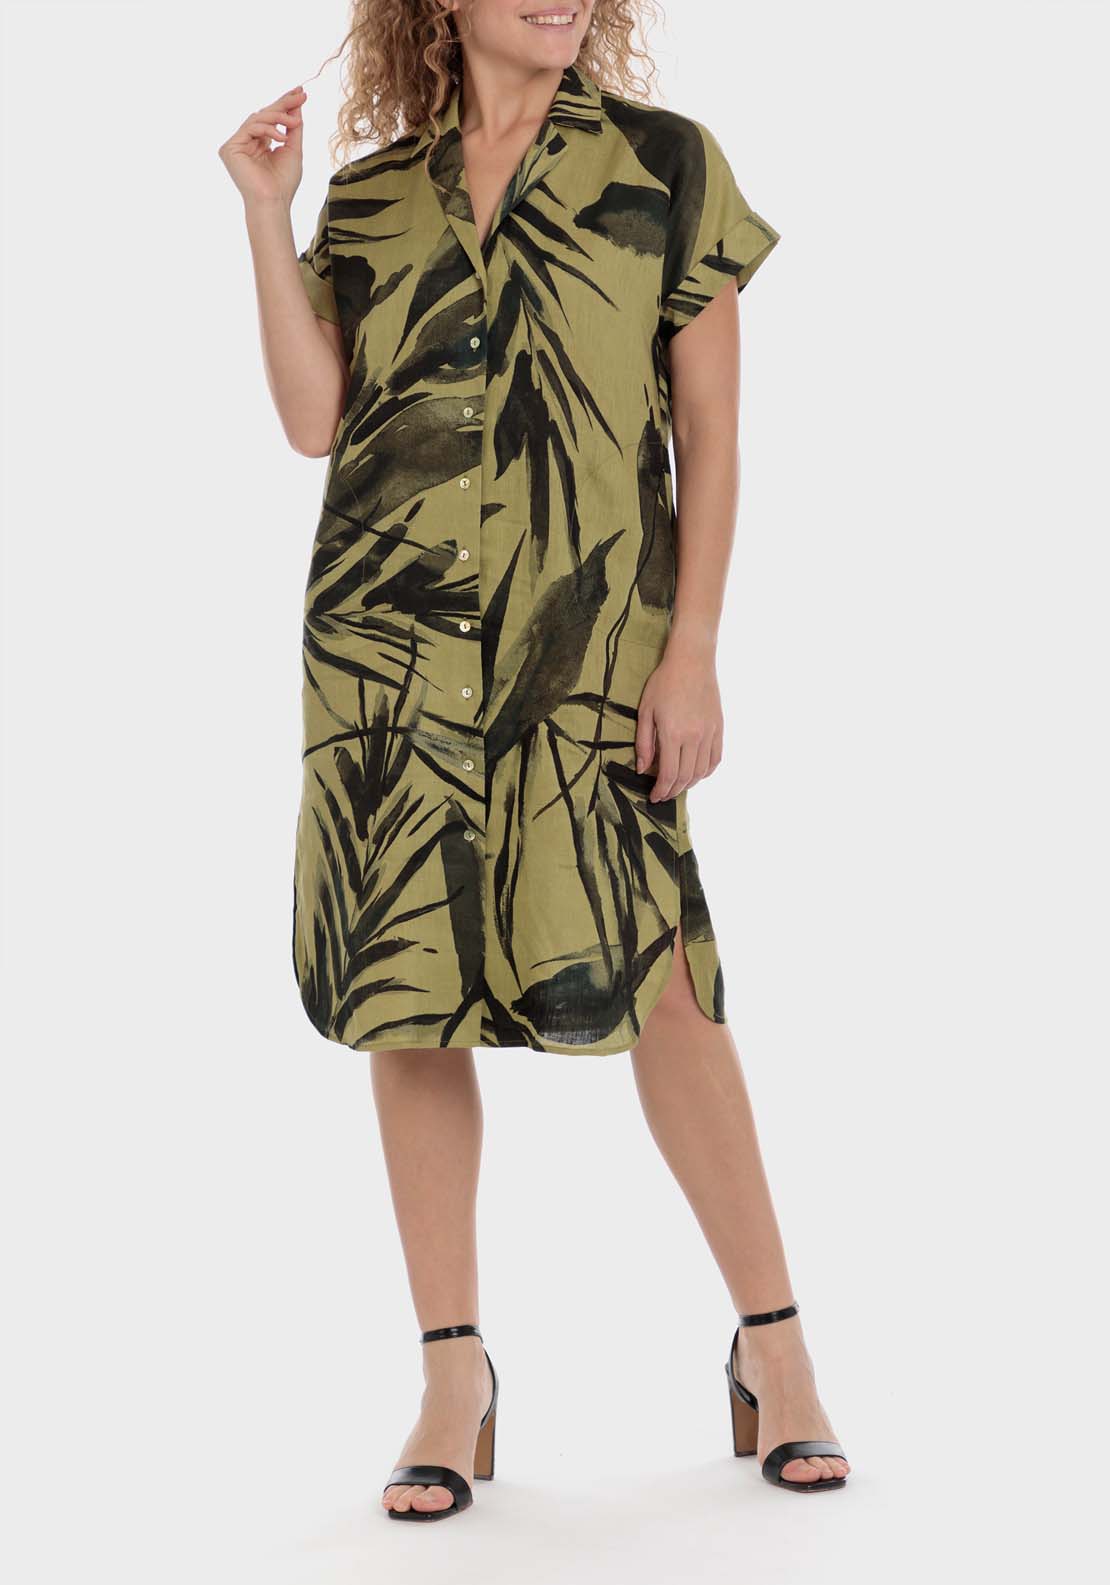 Punt Roma Printed Linen Dress 1 Shaws Department Stores